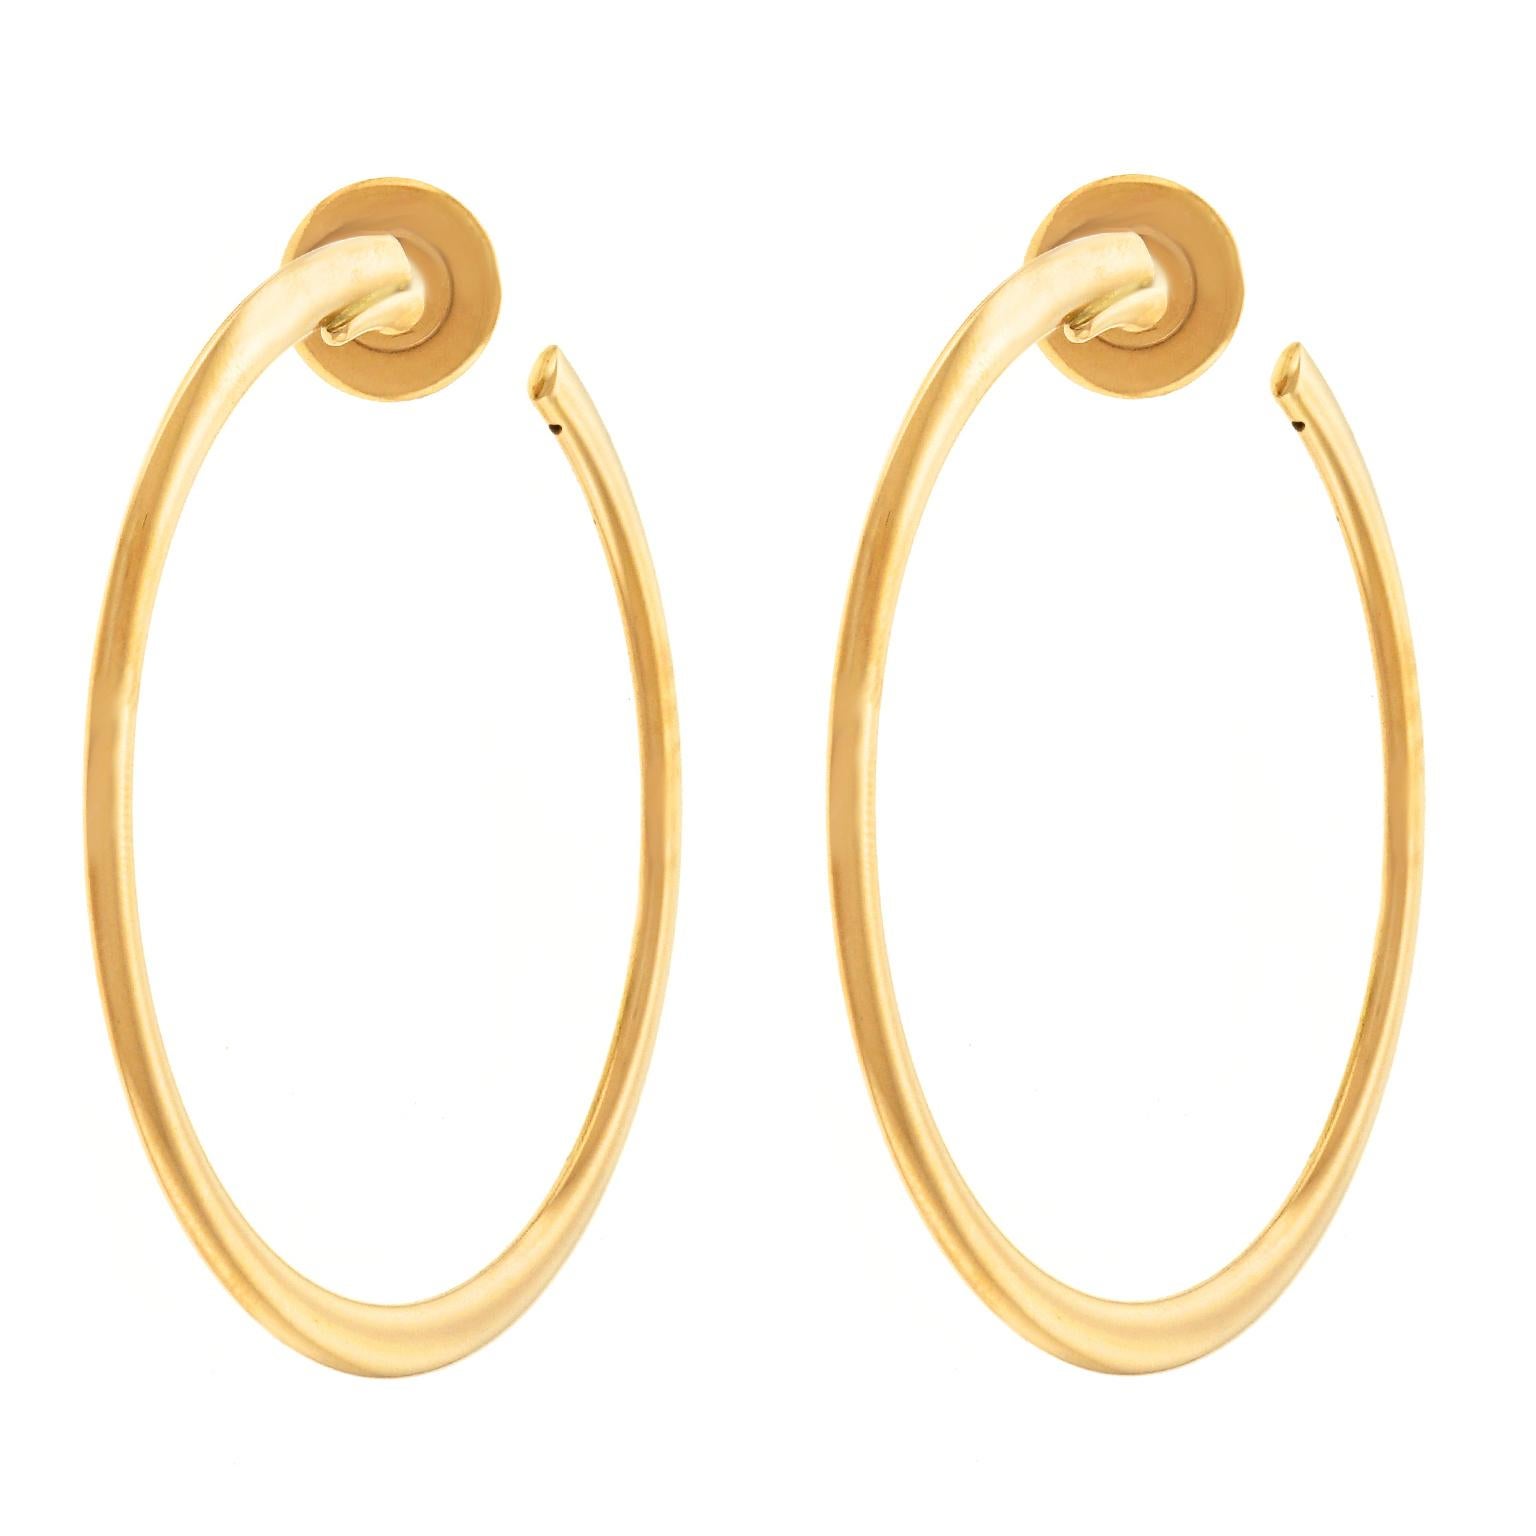 Bucherer Gold Hoop Earrings In Excellent Condition For Sale In Litchfield, CT